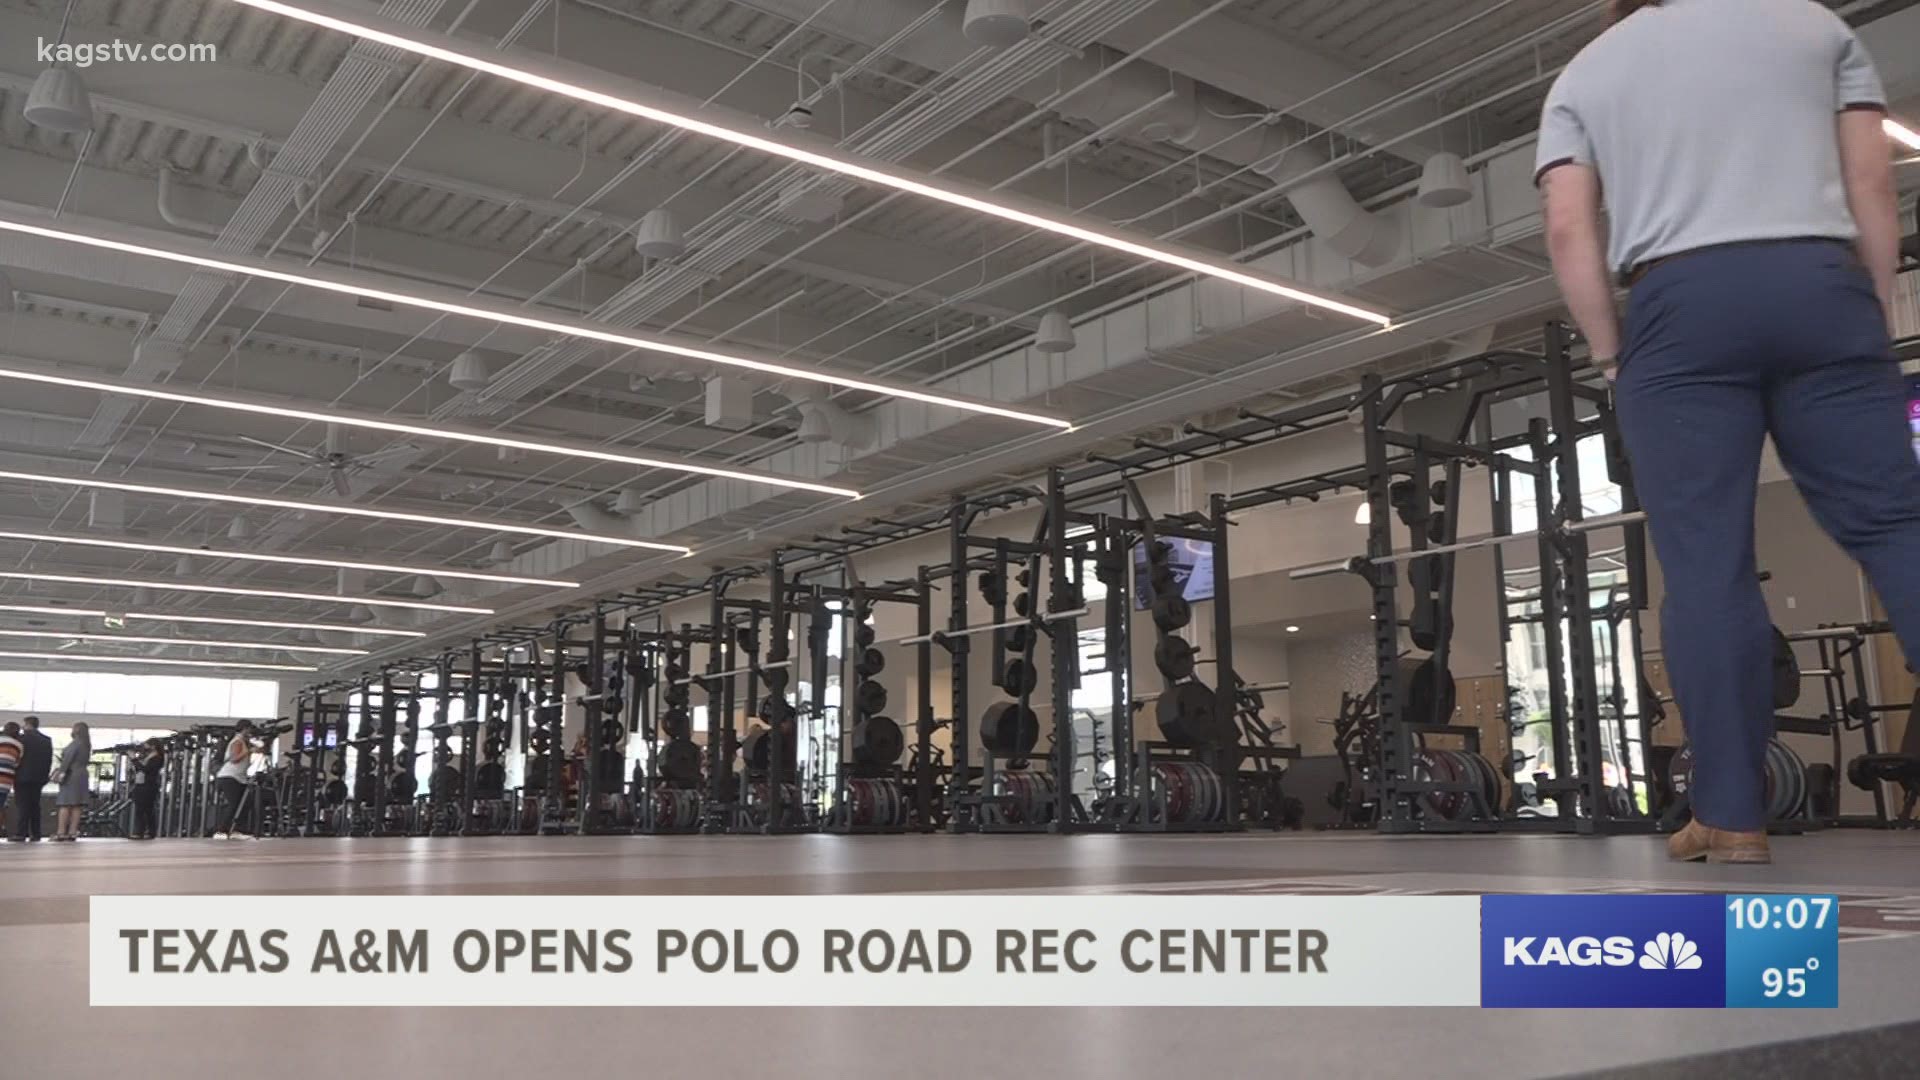 The Polo Road Rec Center will provide relief to overcrowding in the original Rec Center and give more Aggies a chance to stay active.